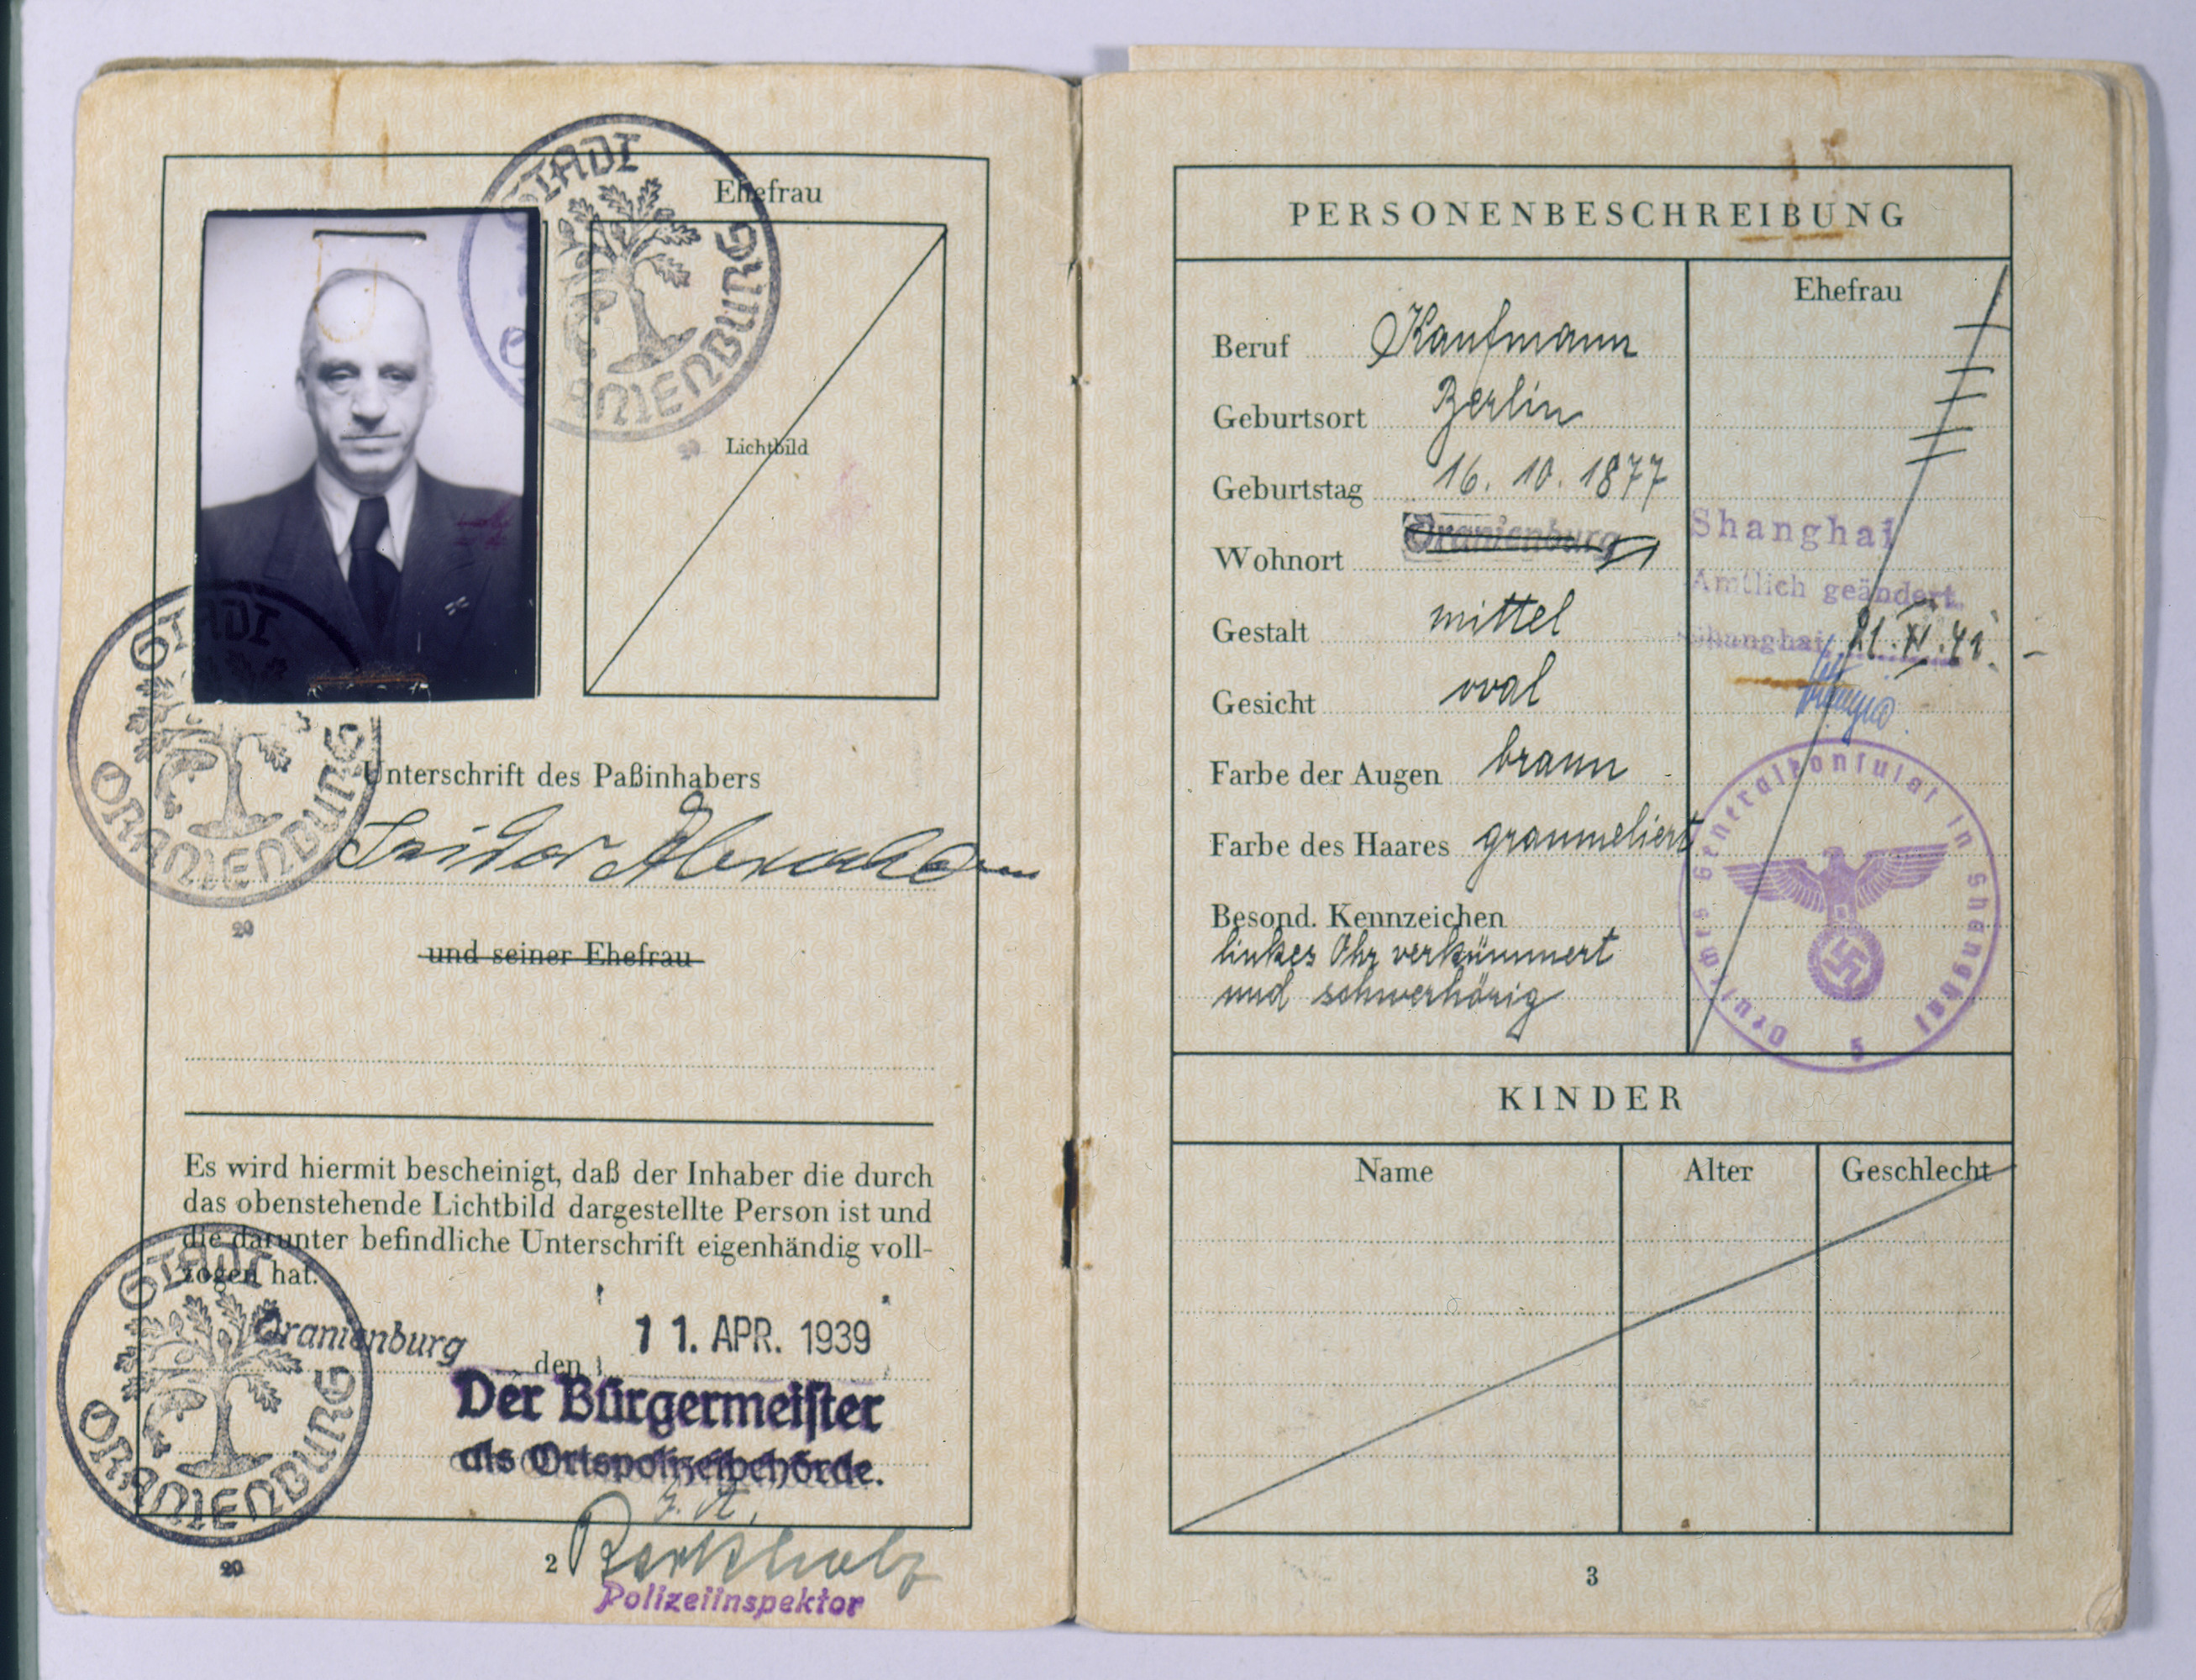 Pages two and three of the German passport issued to Isidor Abraham (the grandfather of the donor's wife) on April 11, 1939. 

Persecution of Jews in Hitler's Reich intensified in 1938. All passports held by Jews were stamped with a red "J." Fleeing Germany after the nationwide, Nazi-organized attacks on Jews and Jewish property during November 8-9, 1938 (Kristallnacht), Isidor Abraham's family emigrated from Berlin to Shanghai, which did not require a visa for entrance. Abraham later died in Shanghai.